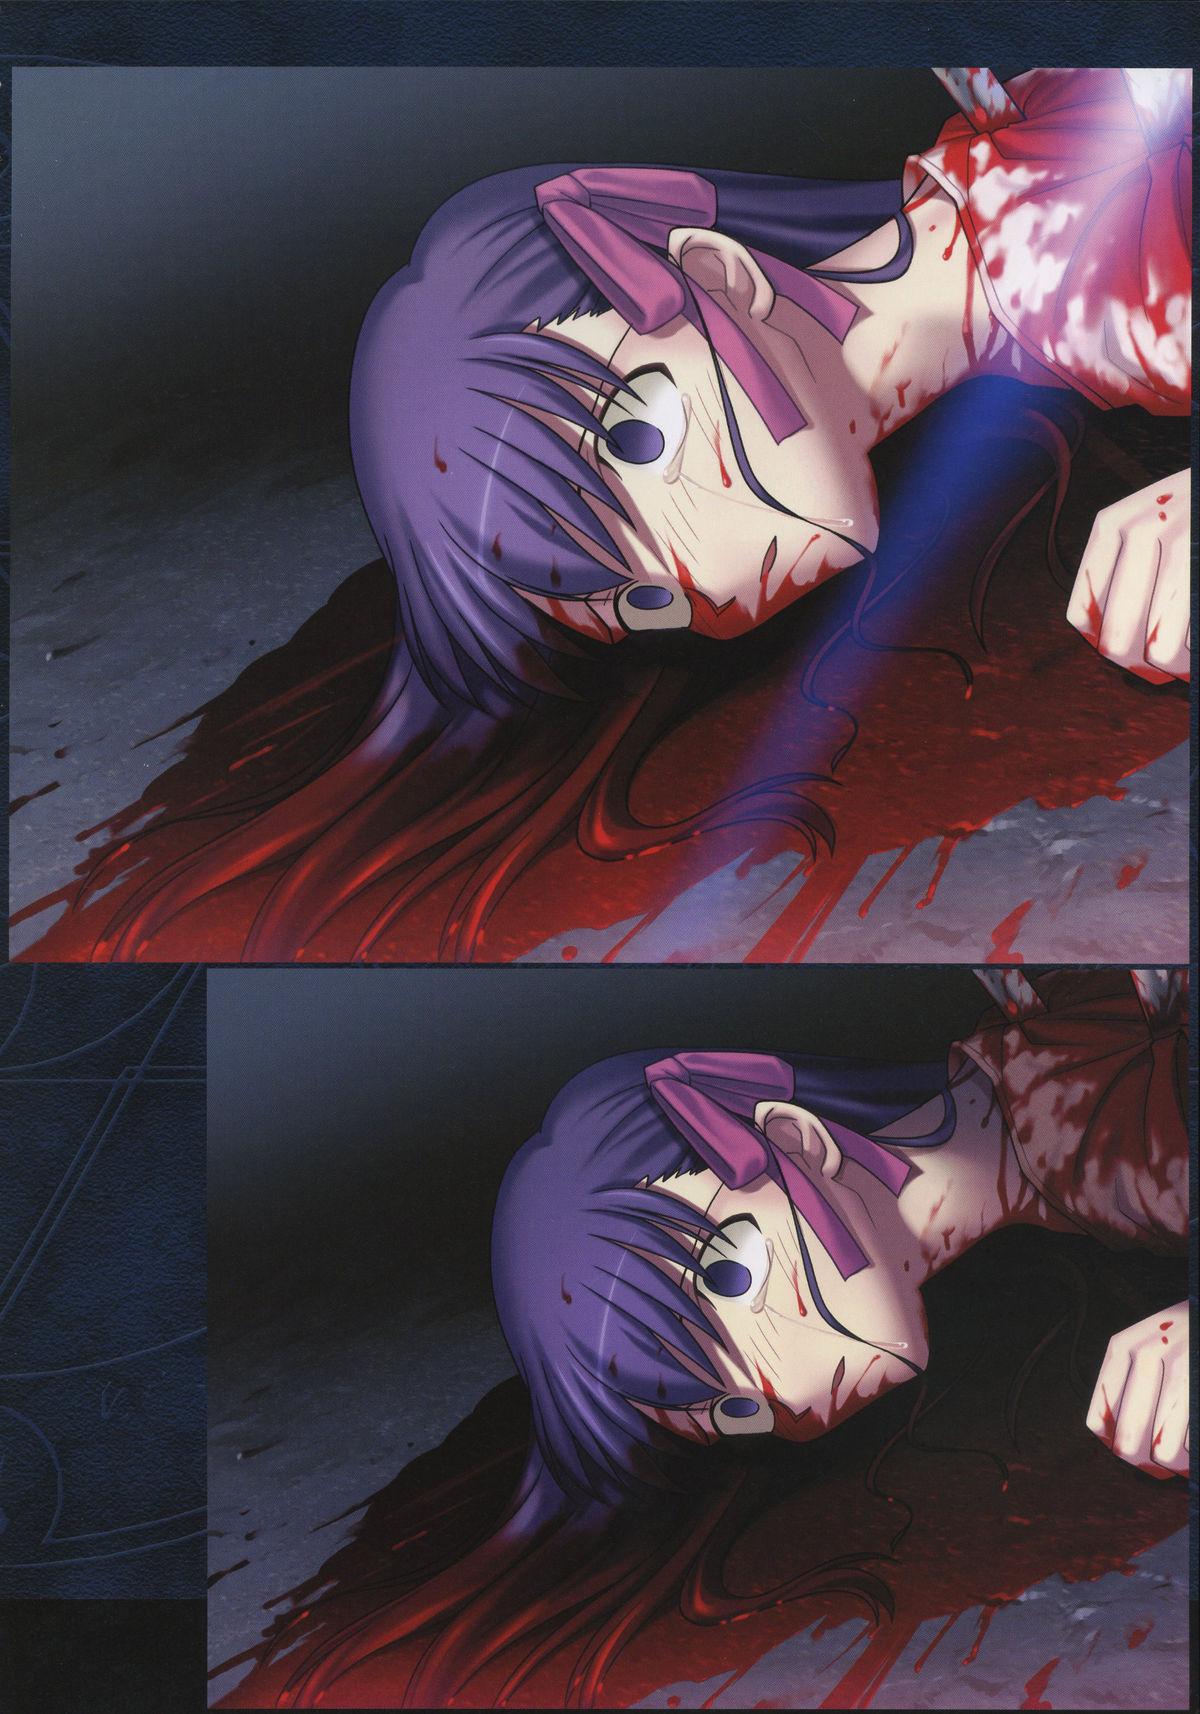 Fate/complete material I - Art material. 91